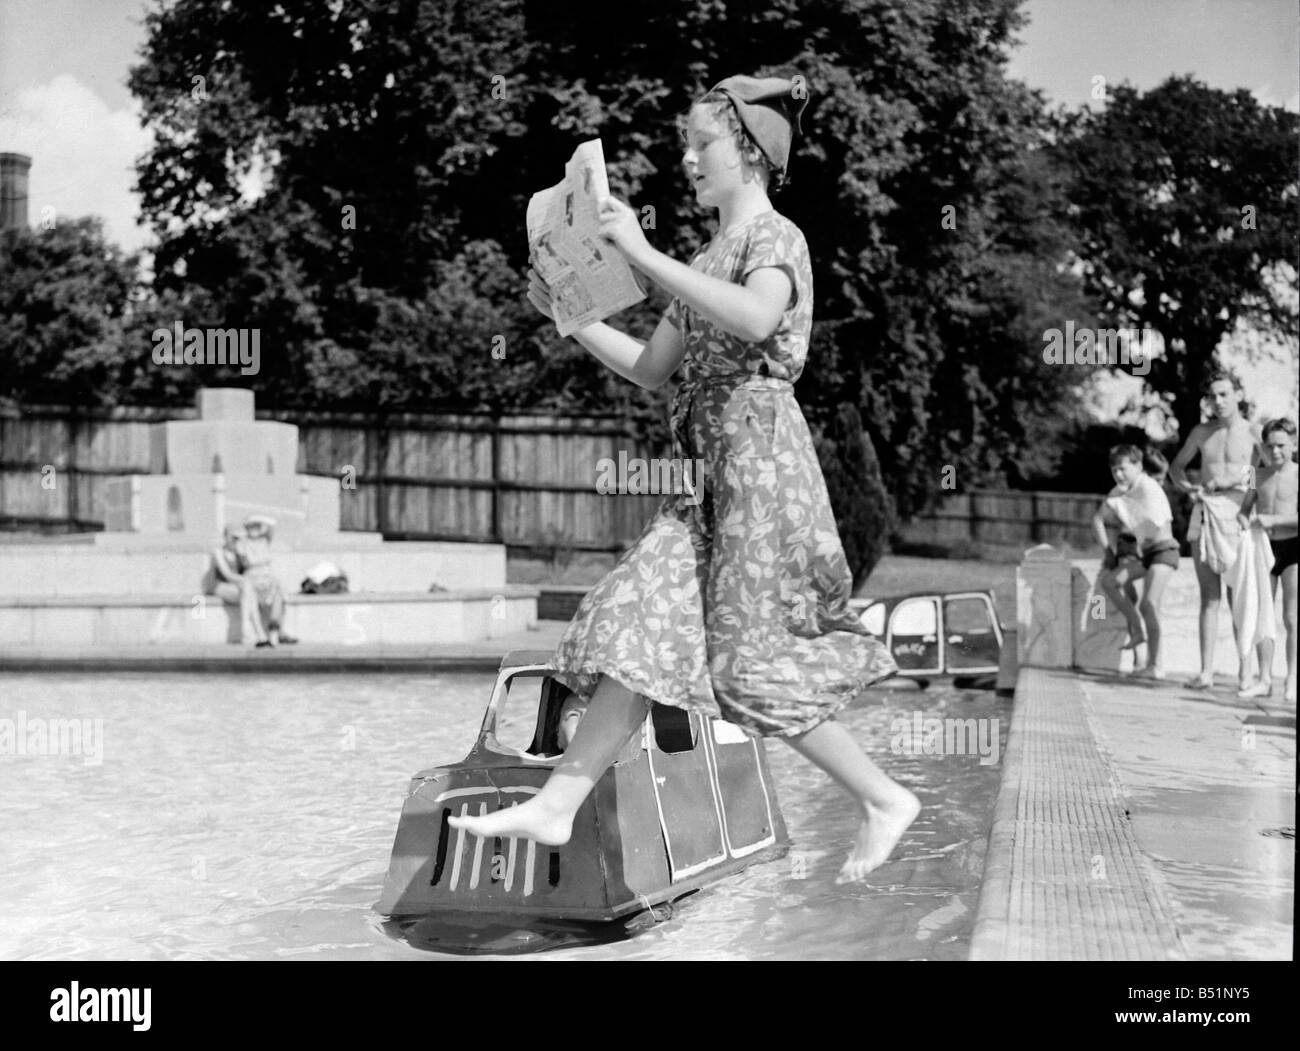 Road safety lessons at Hemel Hempstead swimming pool organised by Mr A L Whittle. Traffic accidents are re-enacted in the pool with traffic lanes marked out.;Barbara Whitehead 13;Staff Photographer F W Reed;DM 21/8/51;B3986 Stock Photo